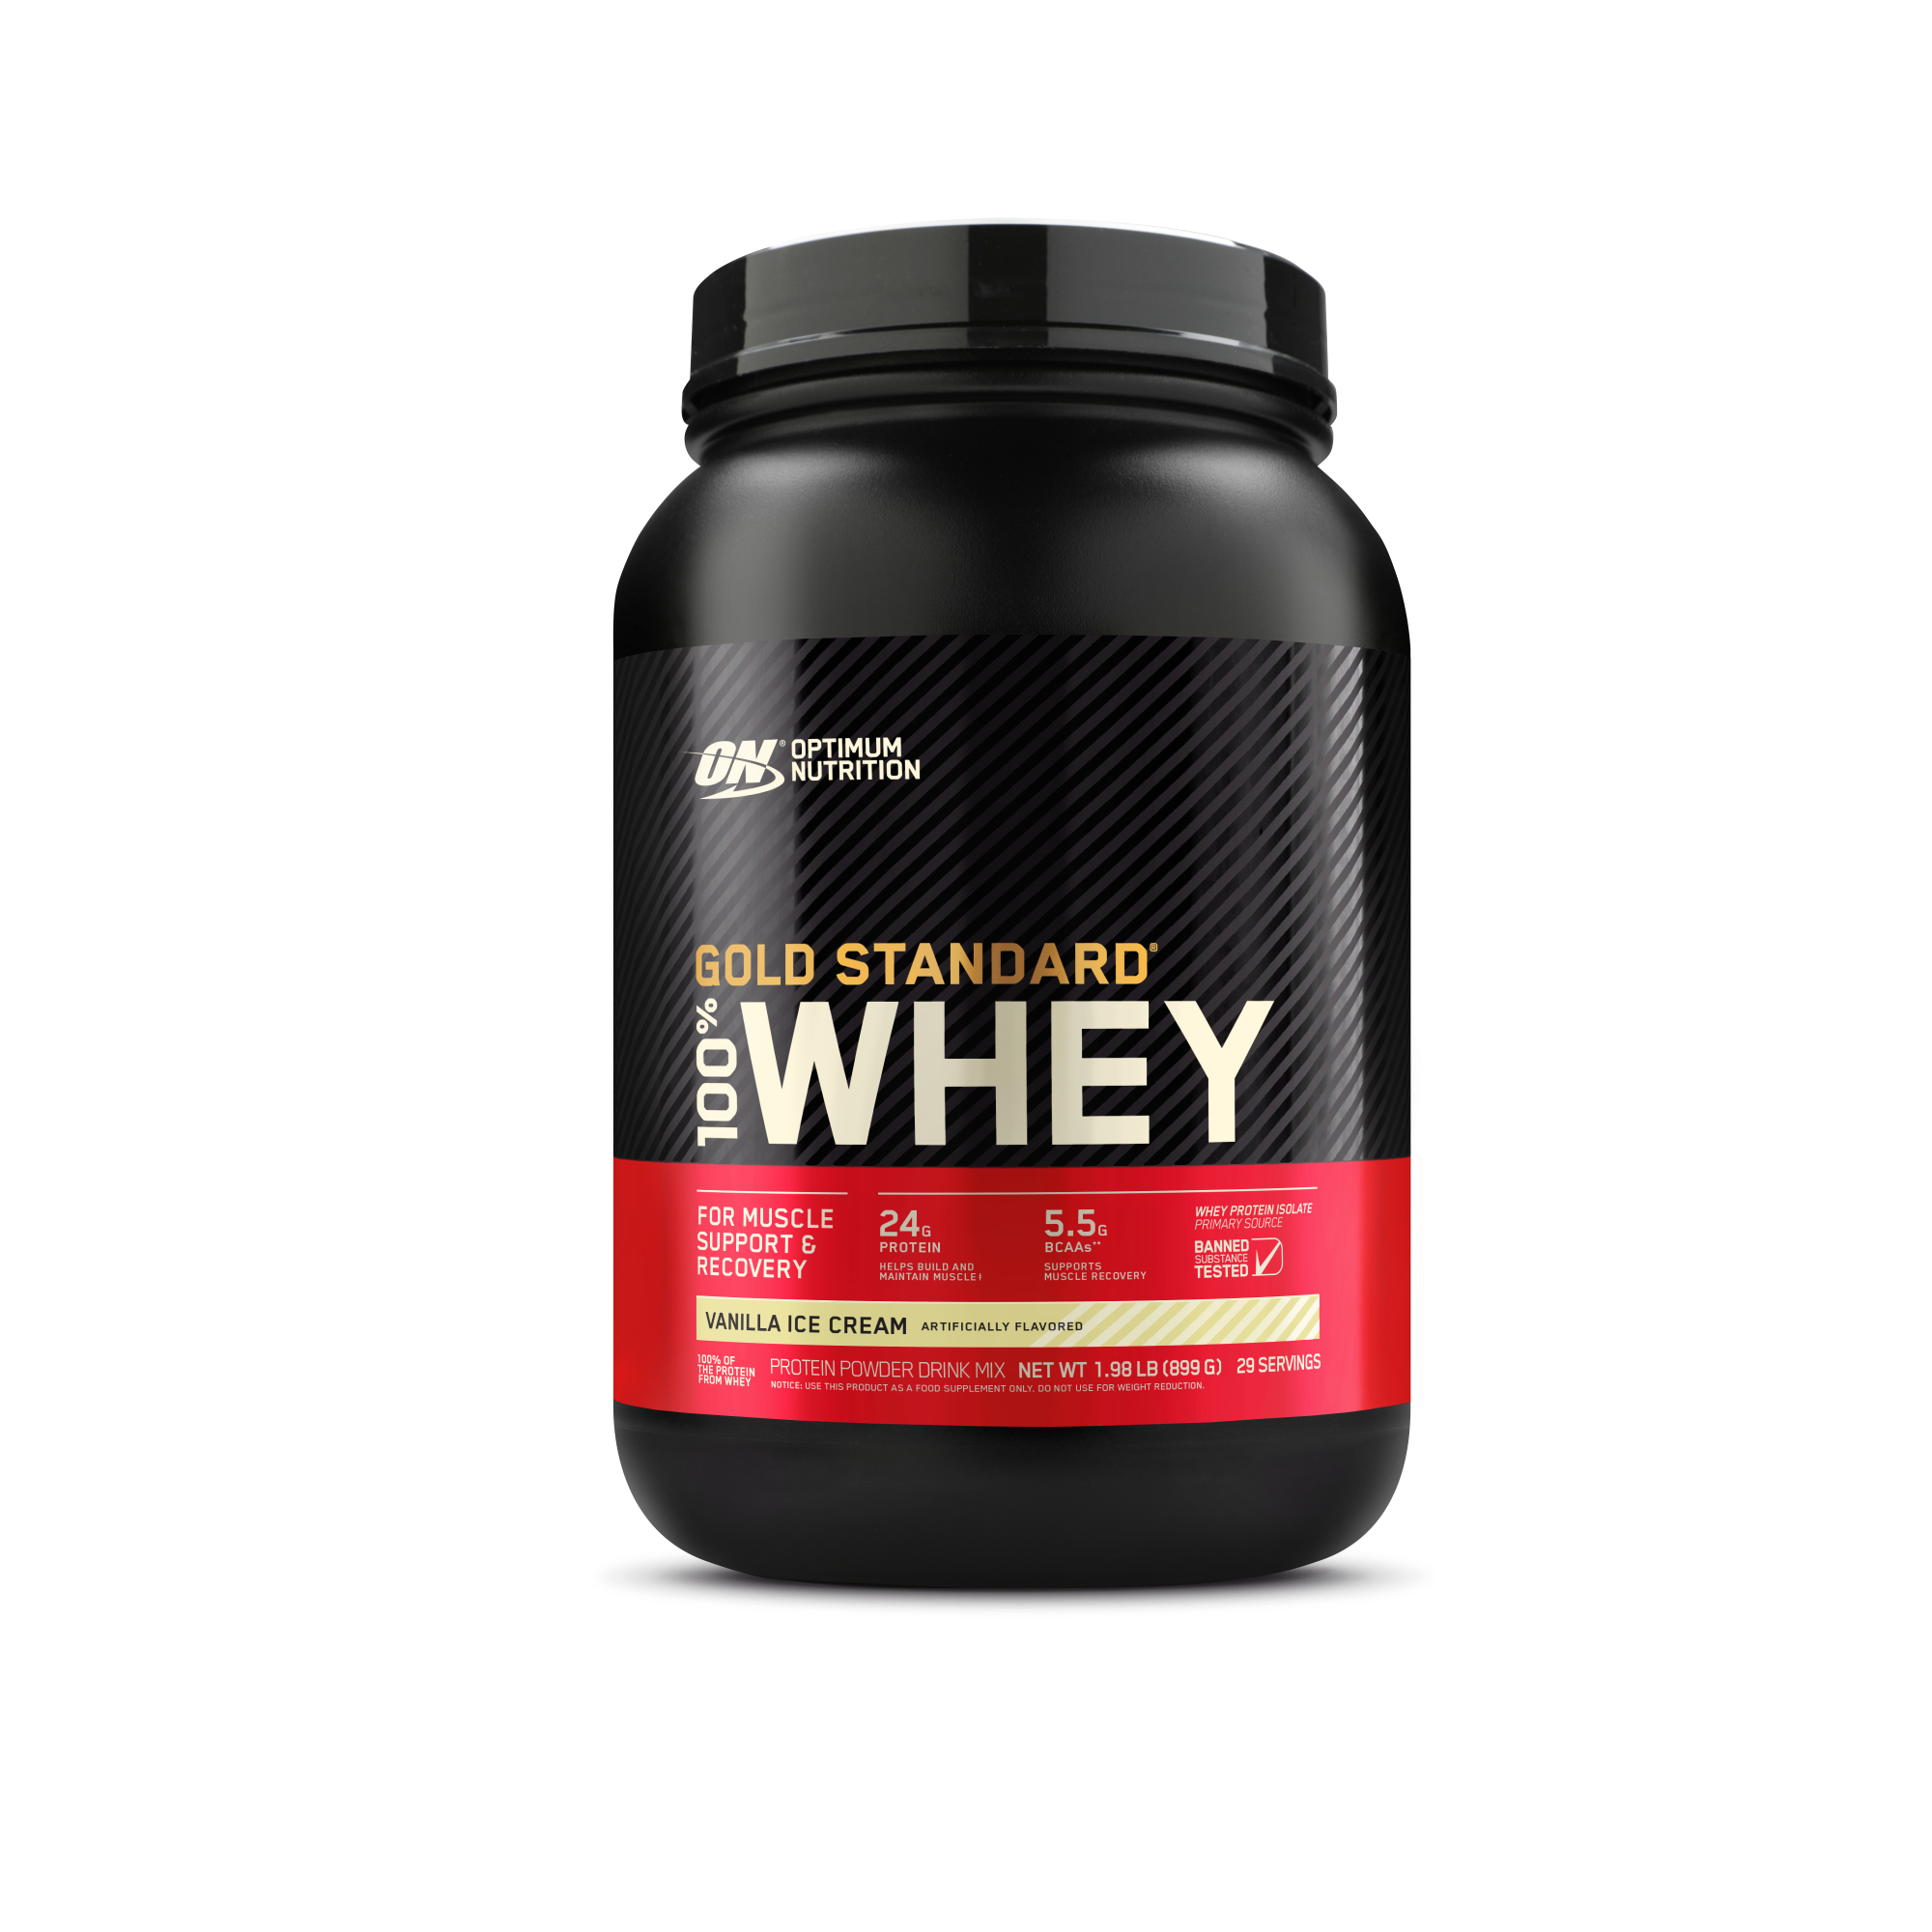 https://content.optimumnutrition.com/i/on/on-gold-standard-100-whey-protein_Image_04?$TTL_PRODUCT_IMAGES$&locale=en-us,en-gb,*